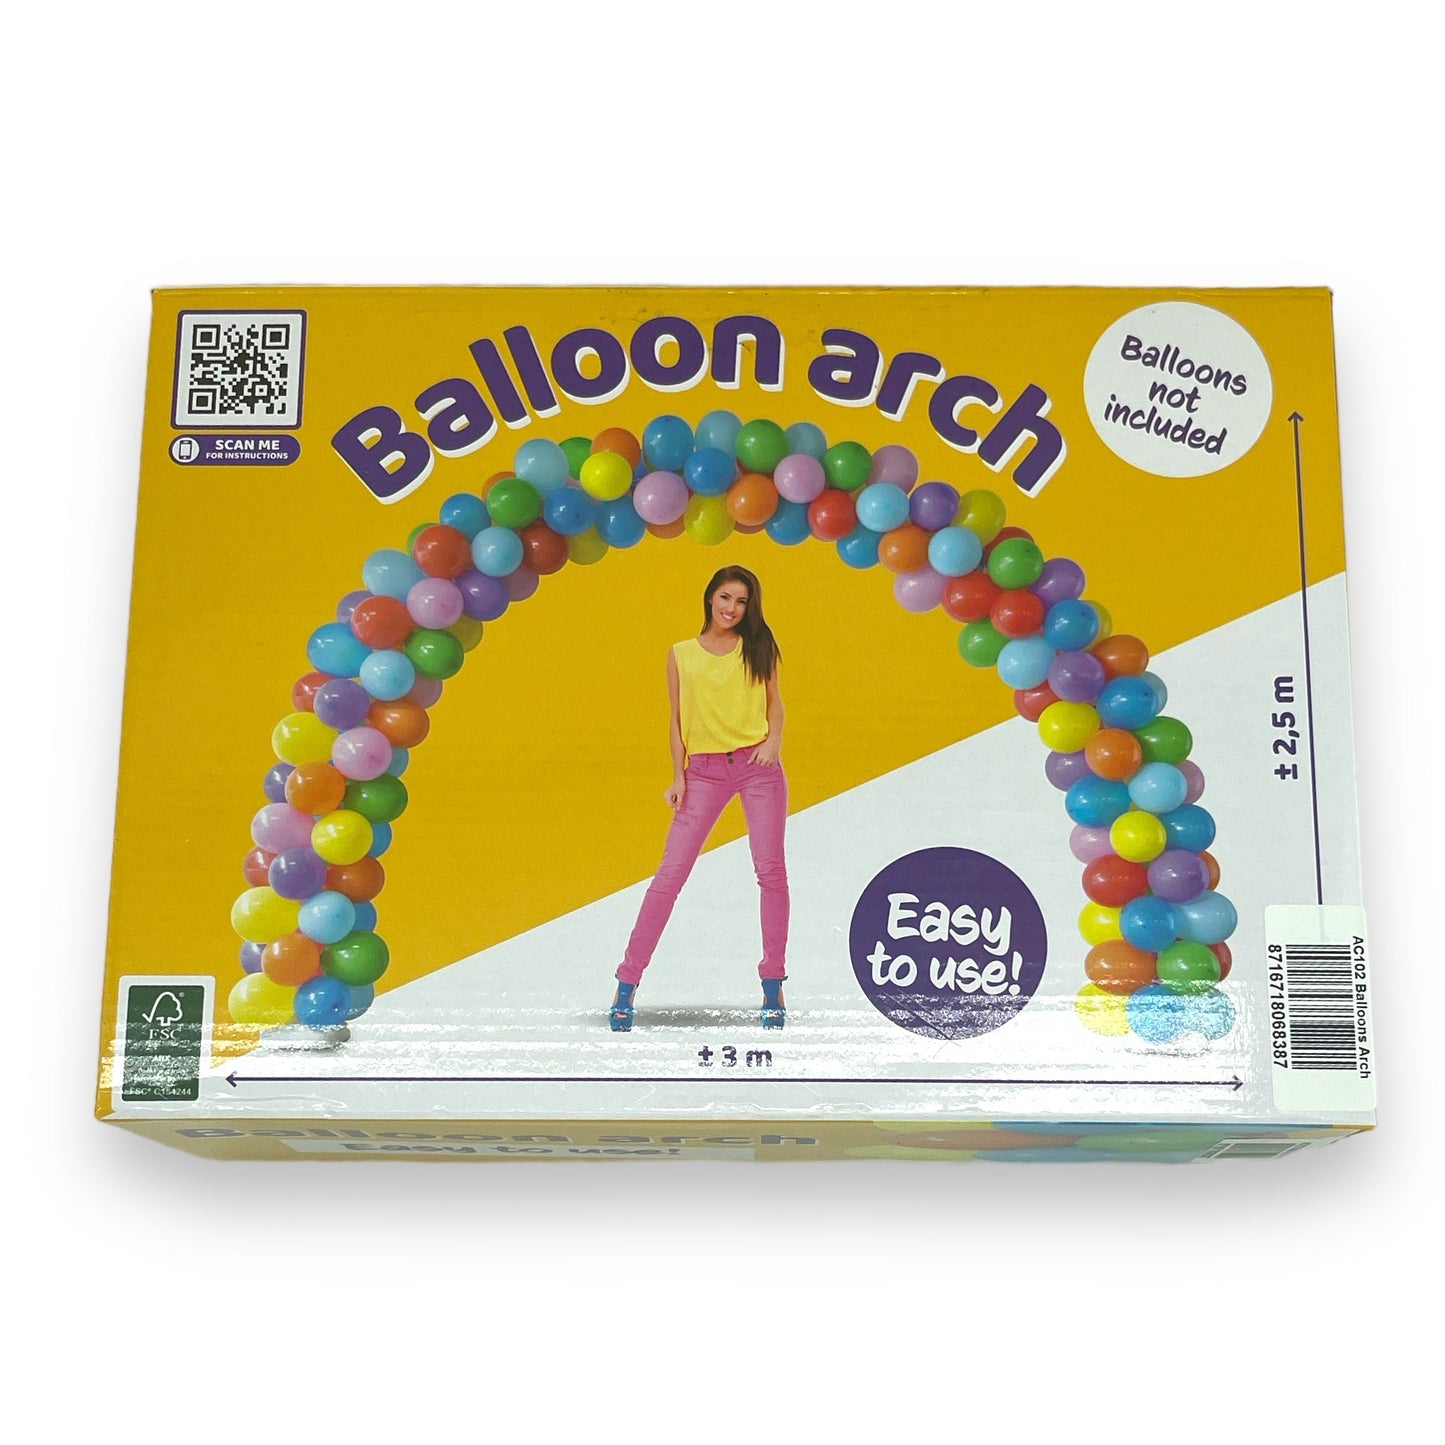 Balloon Arch (Excluding Balloons) - Create Magical Decorations for Any Occasion